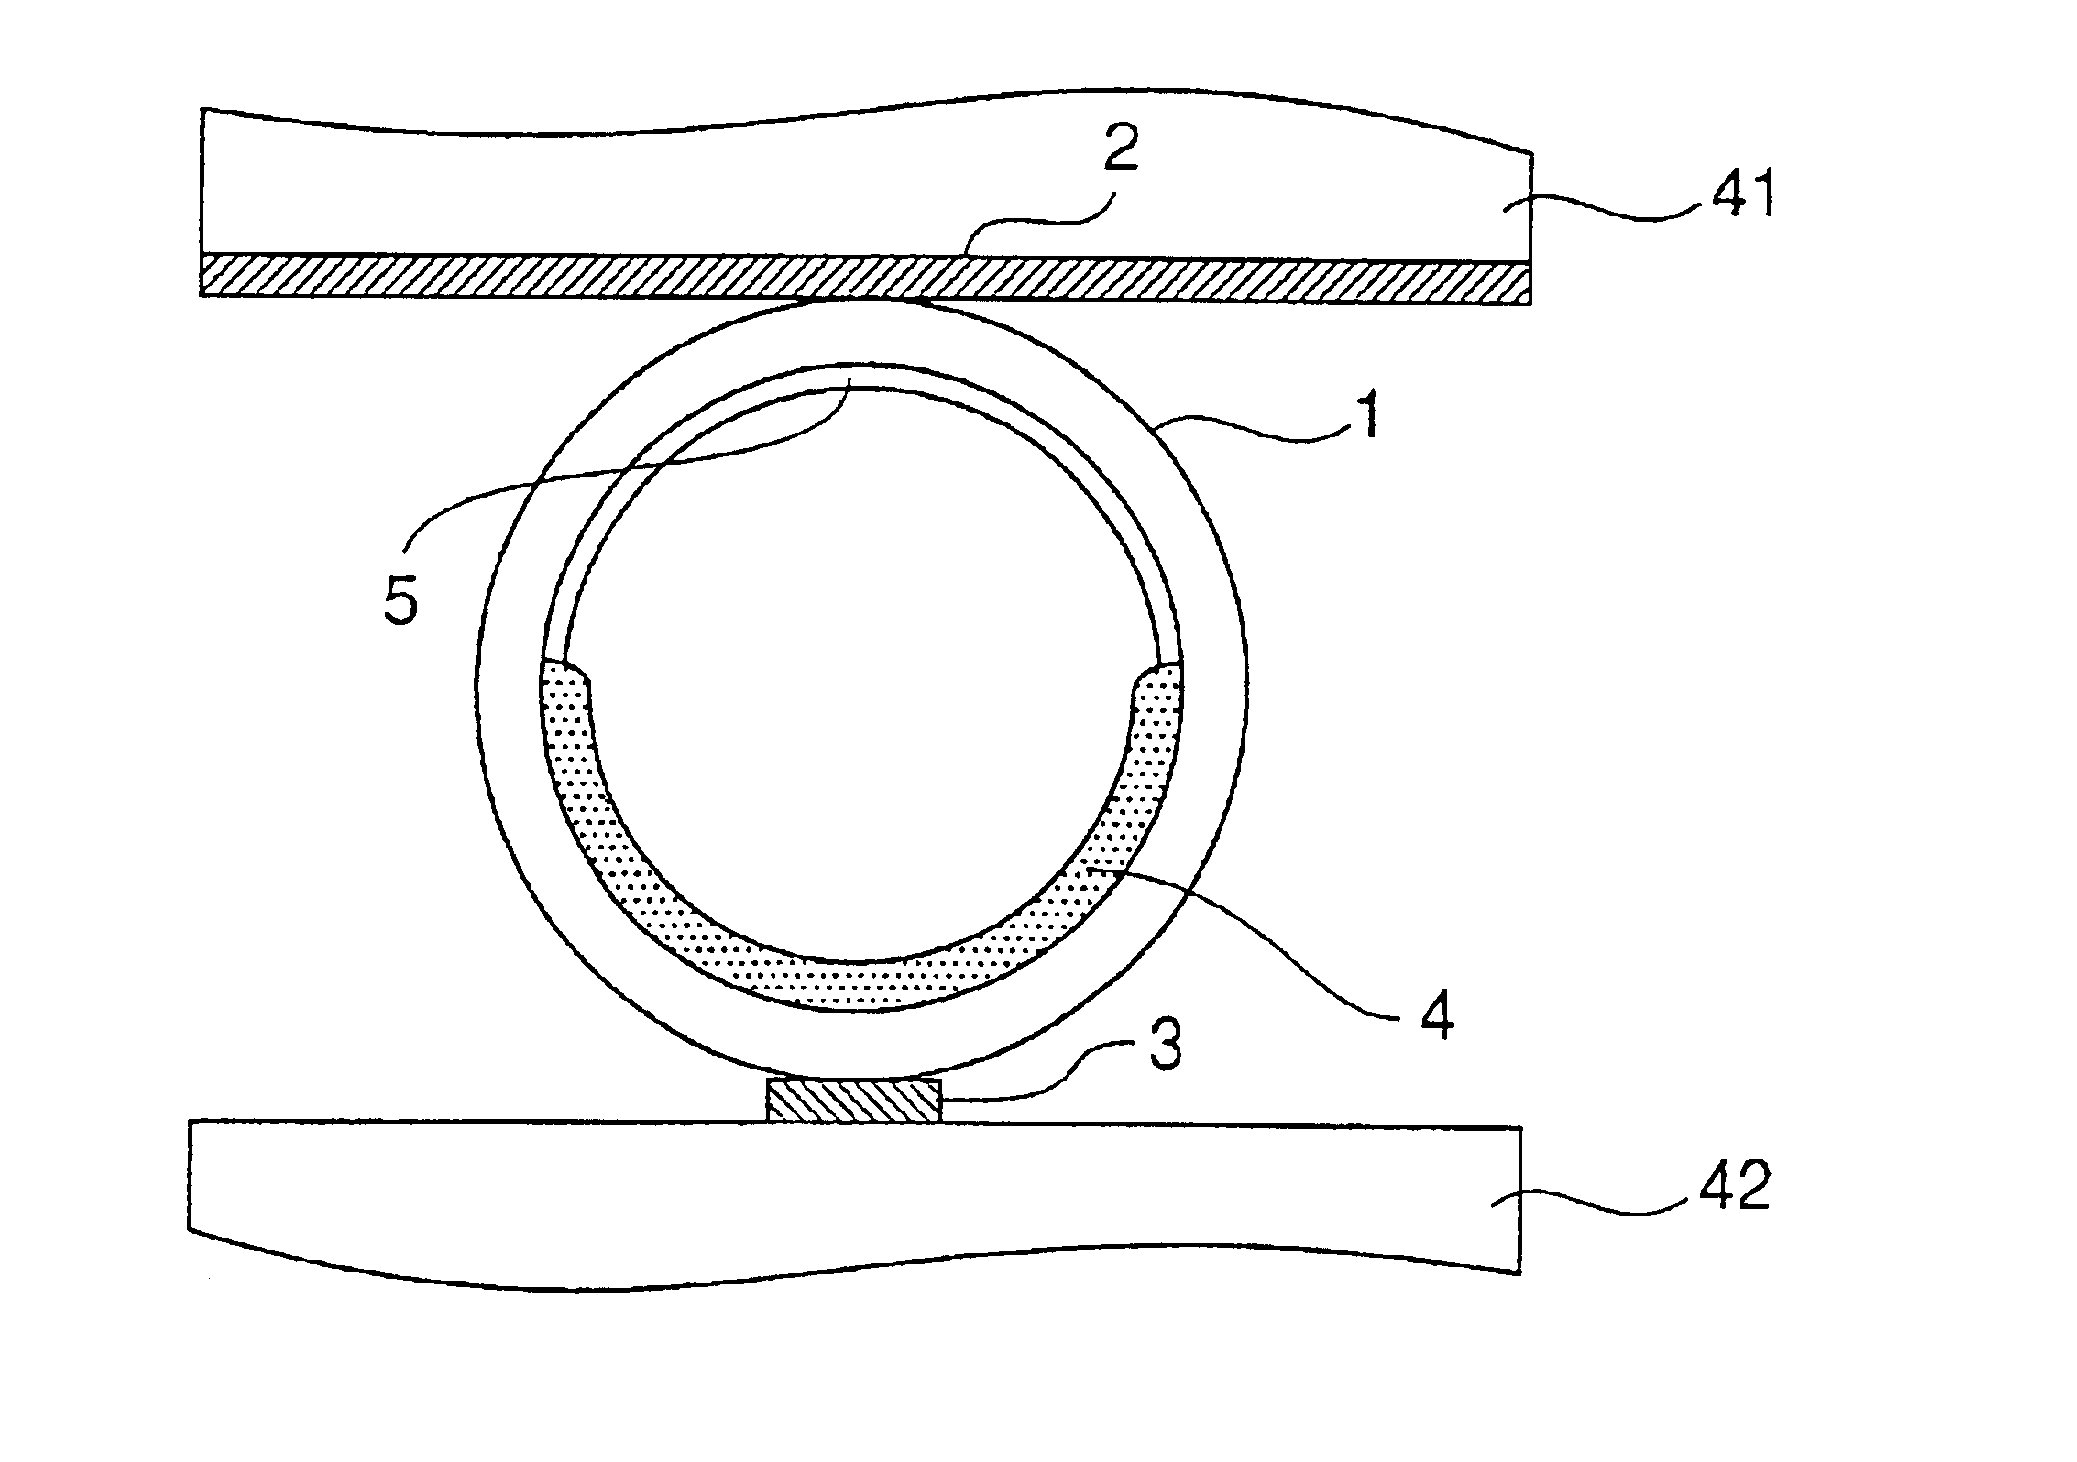 Method of forming phosphor layer of gas discharge tube